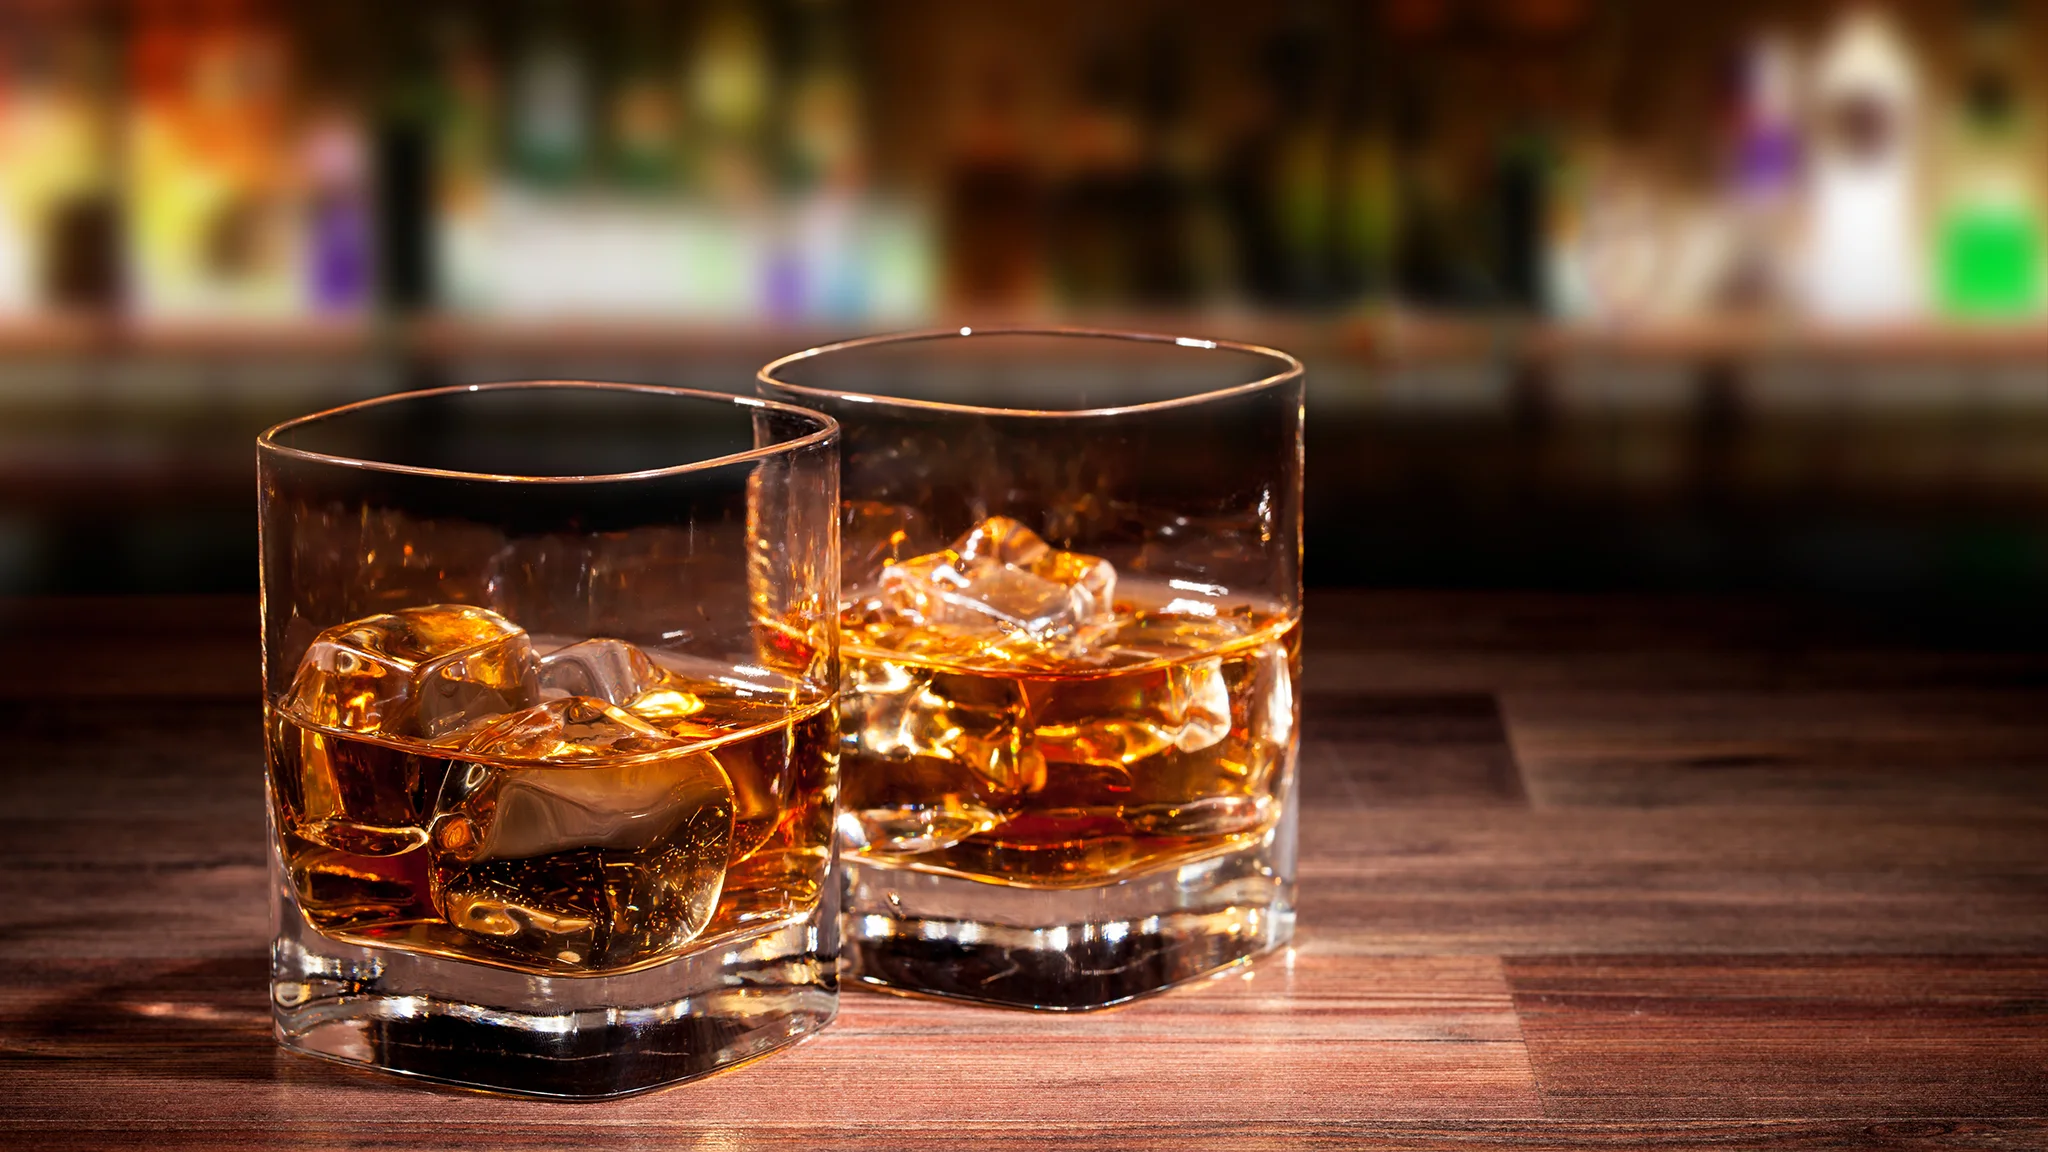 Consider these factors when choosing a single-malt whisky